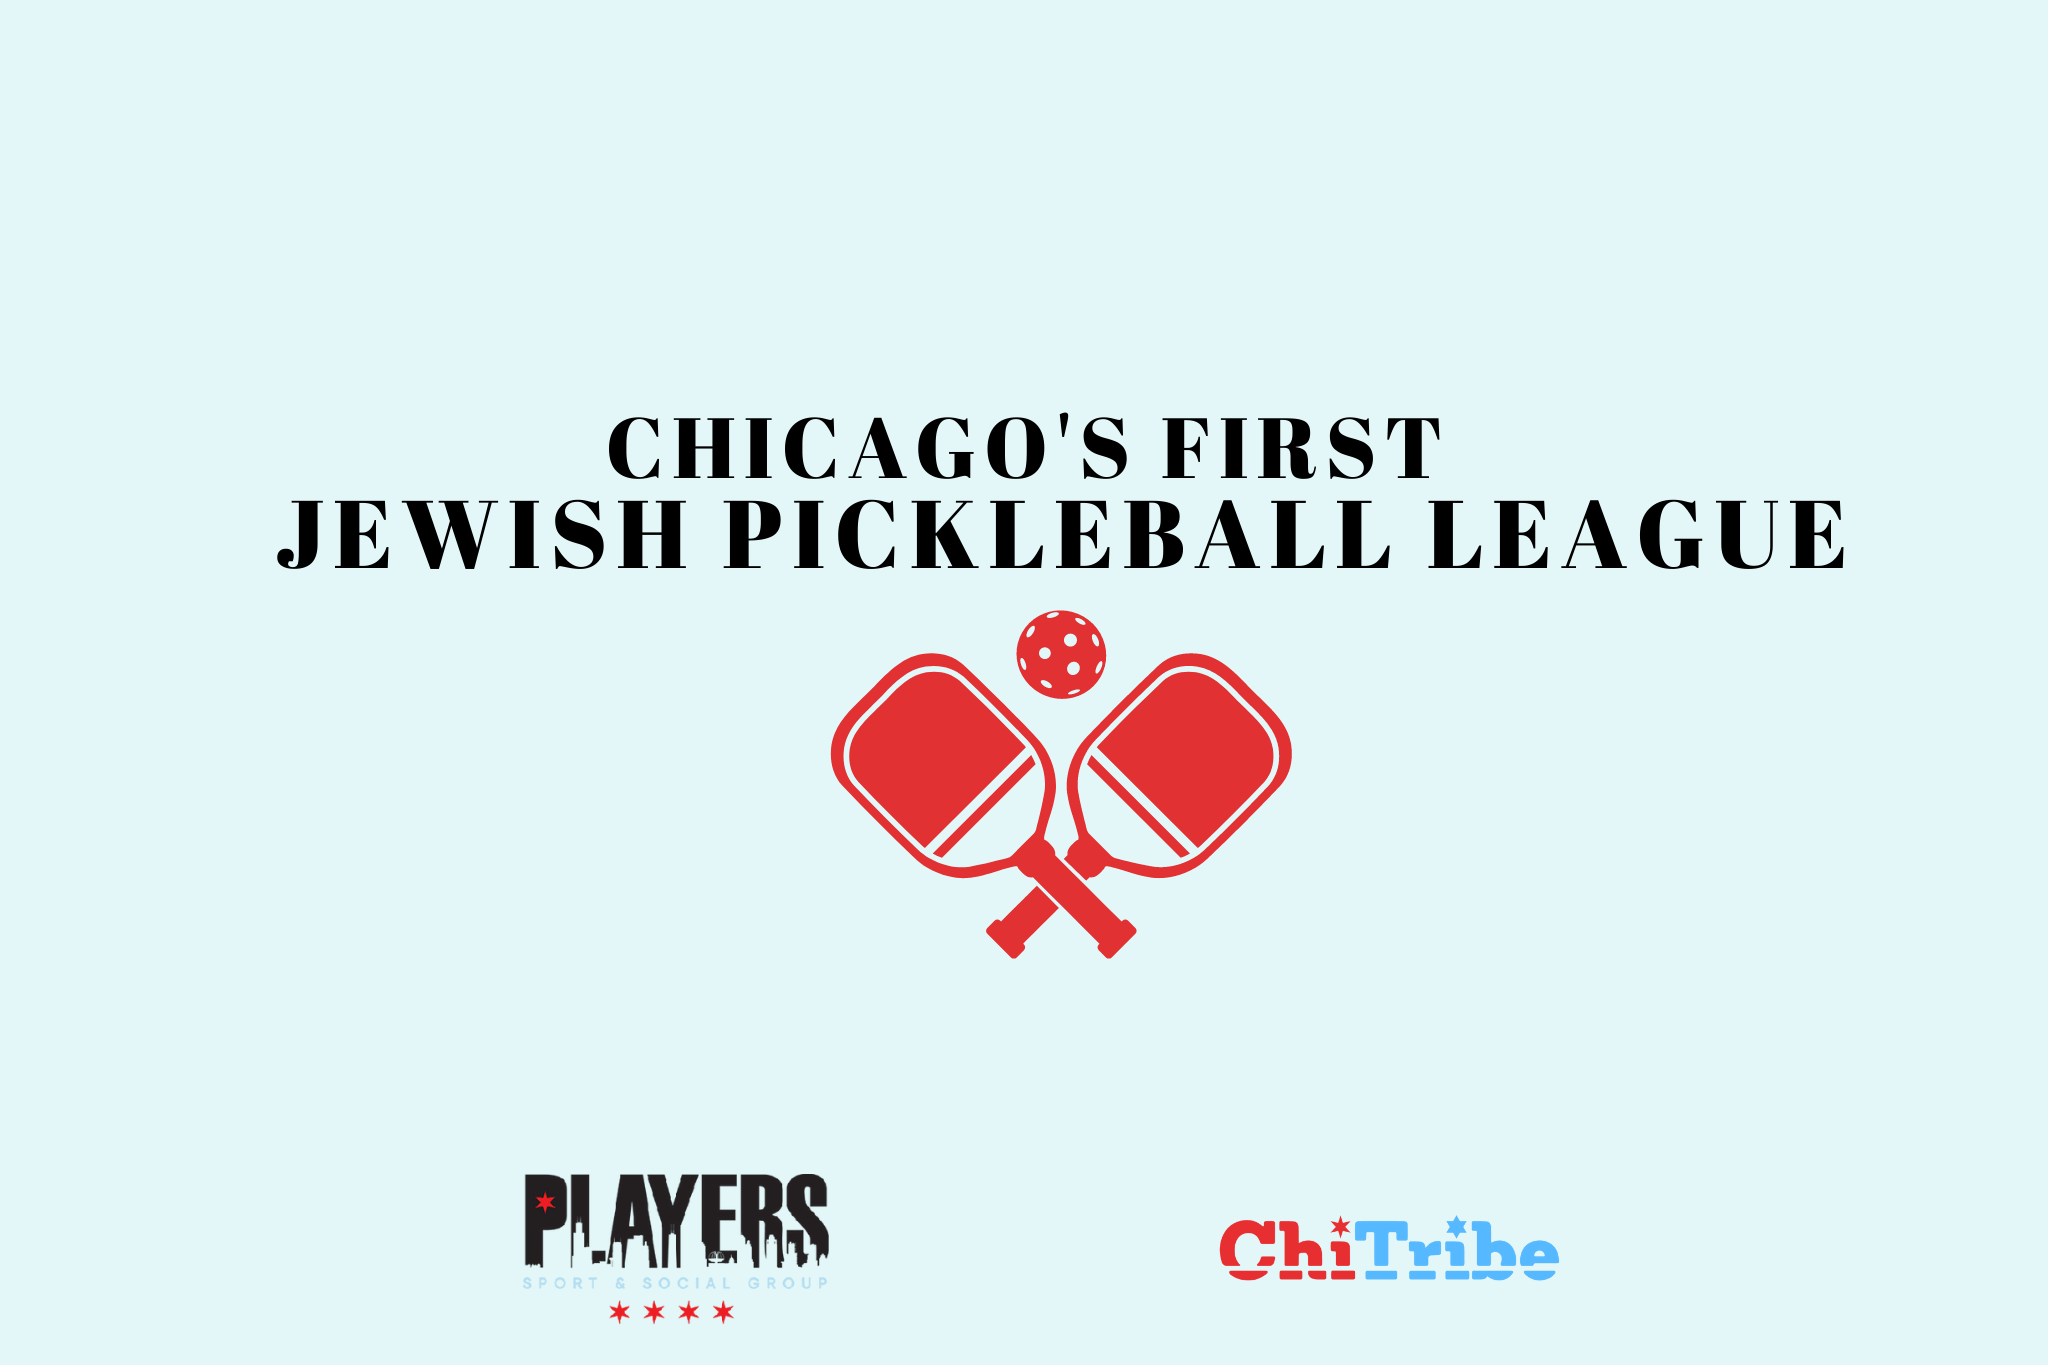 Chicago’s First Jewish Pickleball League